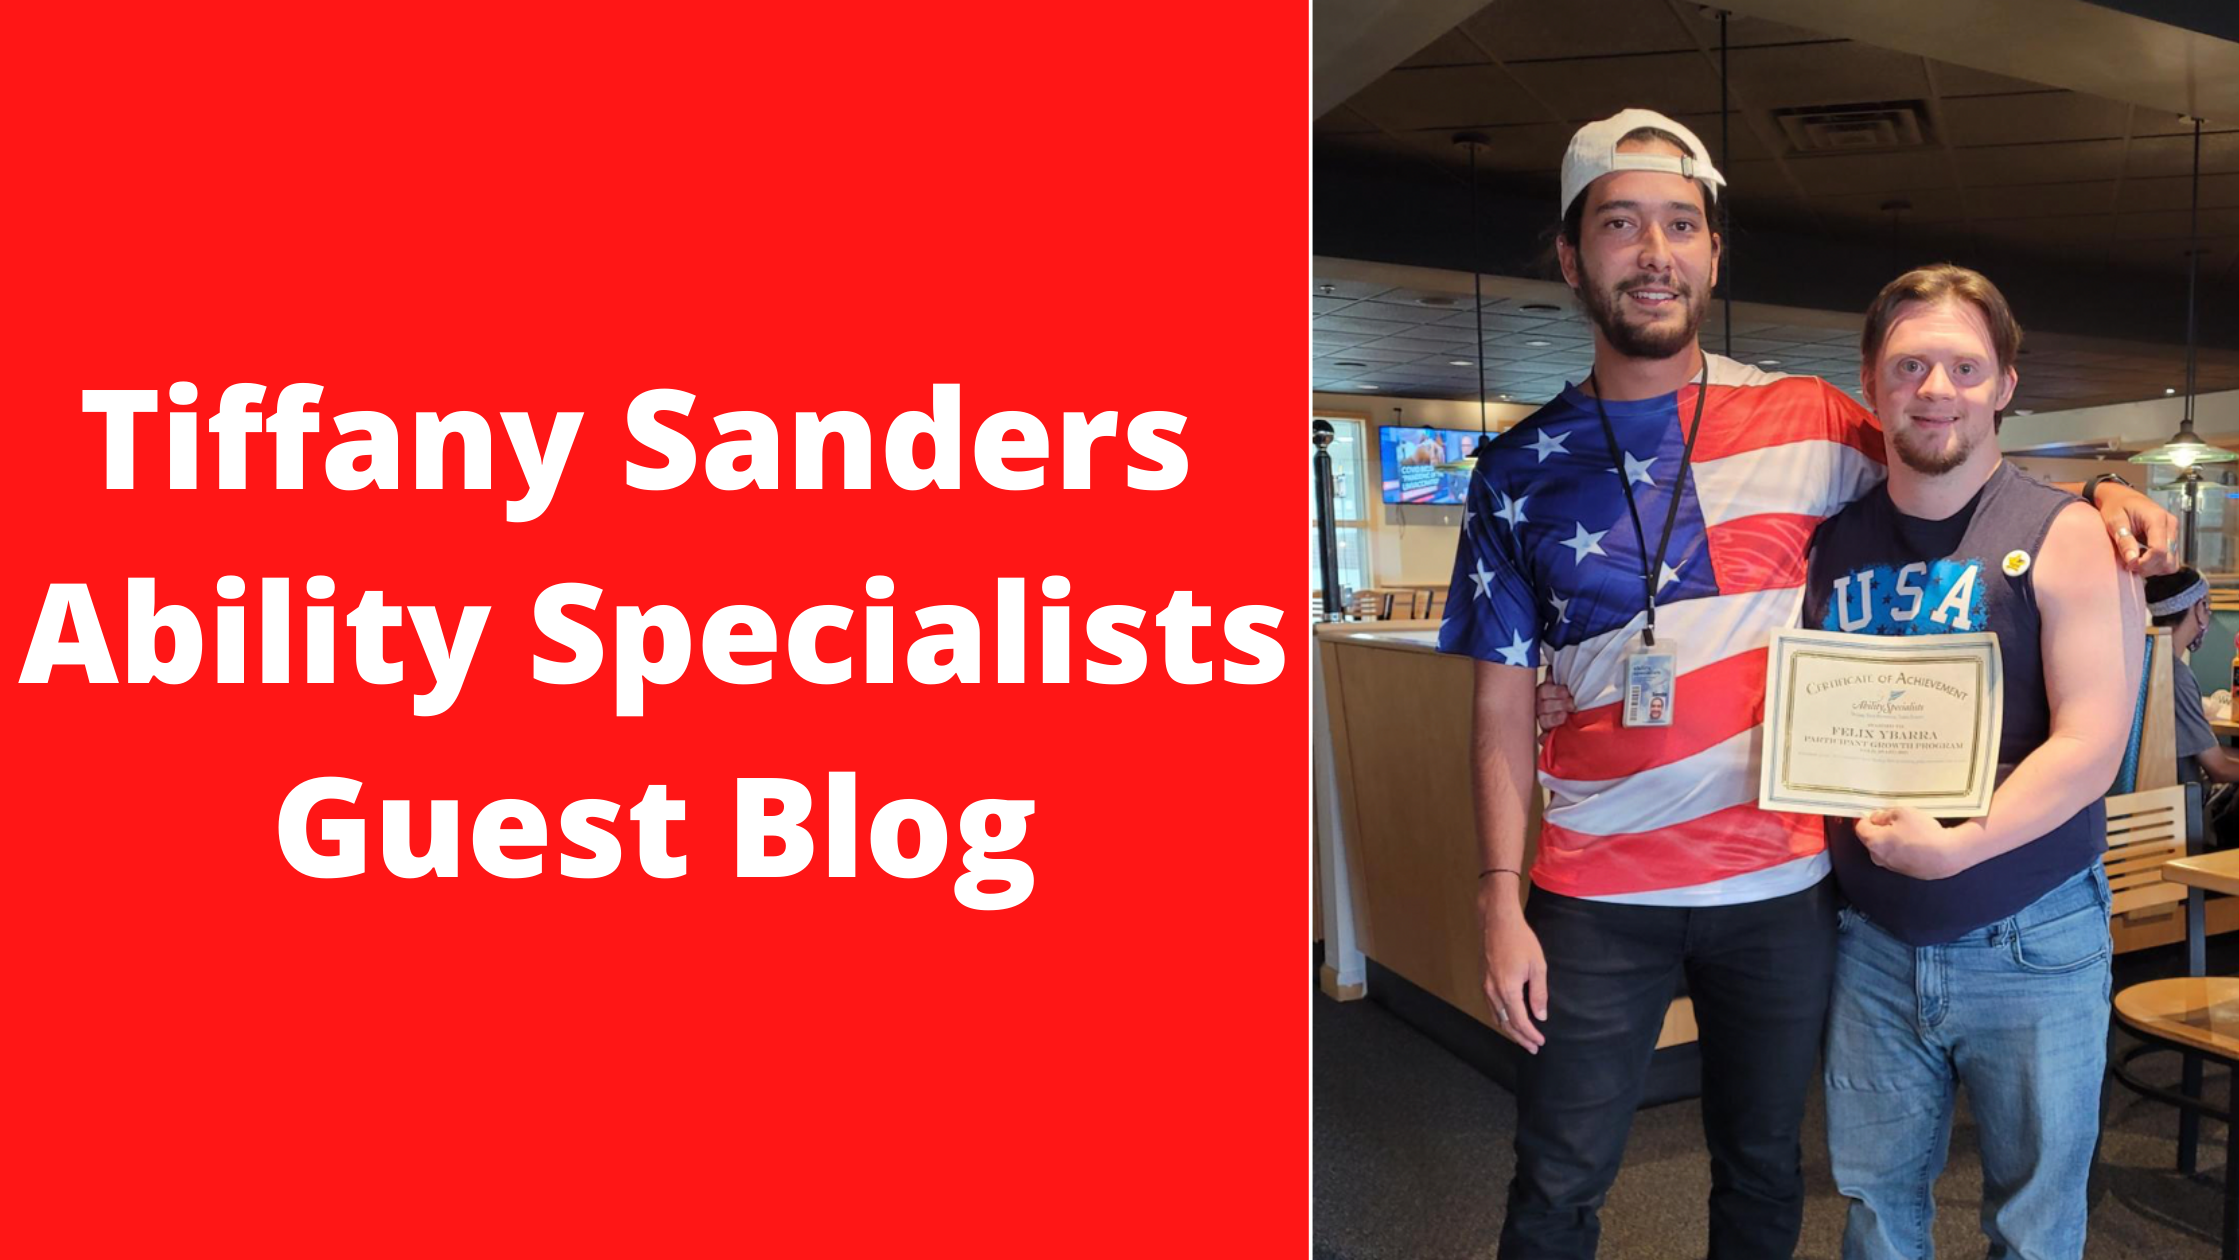 Tiffany Sanders Ability Specialists Guest Blog